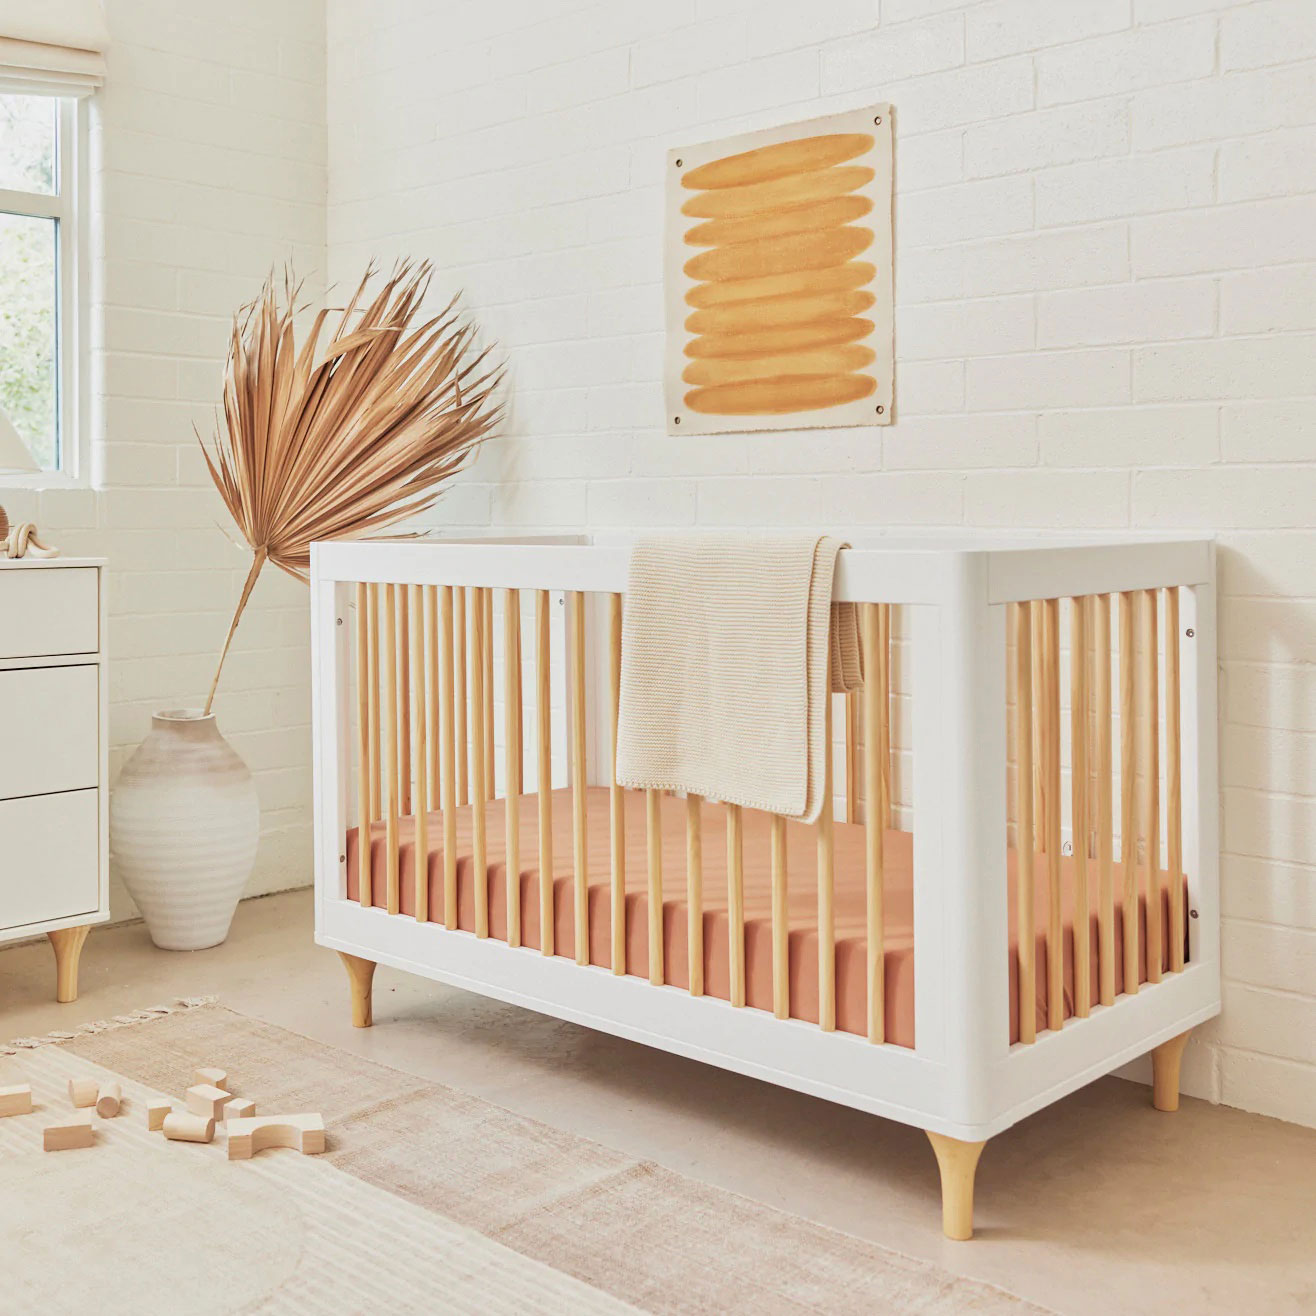 Babyletto Lolly 3-in-1 Convertible Crib with Toddler Bed Conversion Kit - White/Washed Natural in home